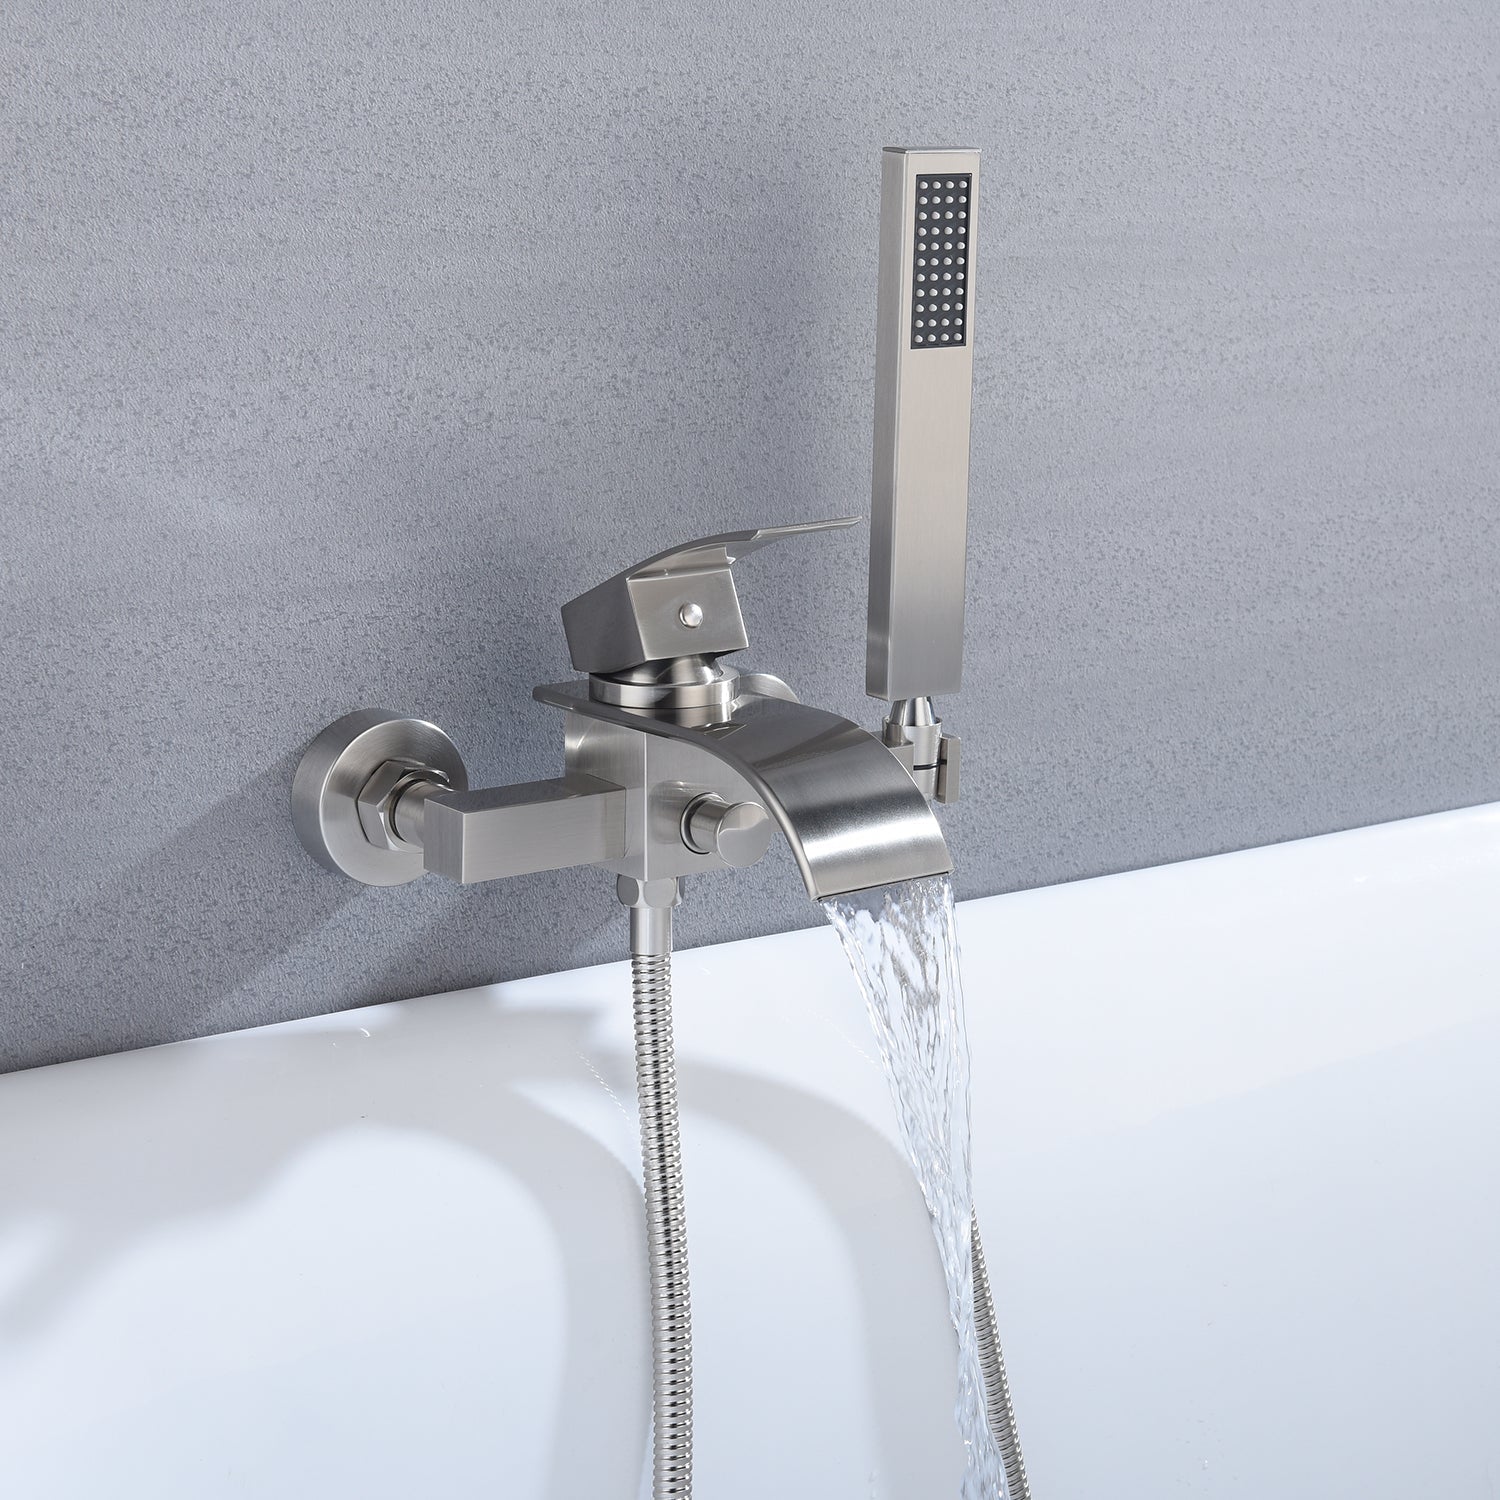 Brushed Nickel Waterfall Wall-Mount Bath Tub Filler Faucet: Complete with Handheld Shower for a Luxurious Bathing Experience